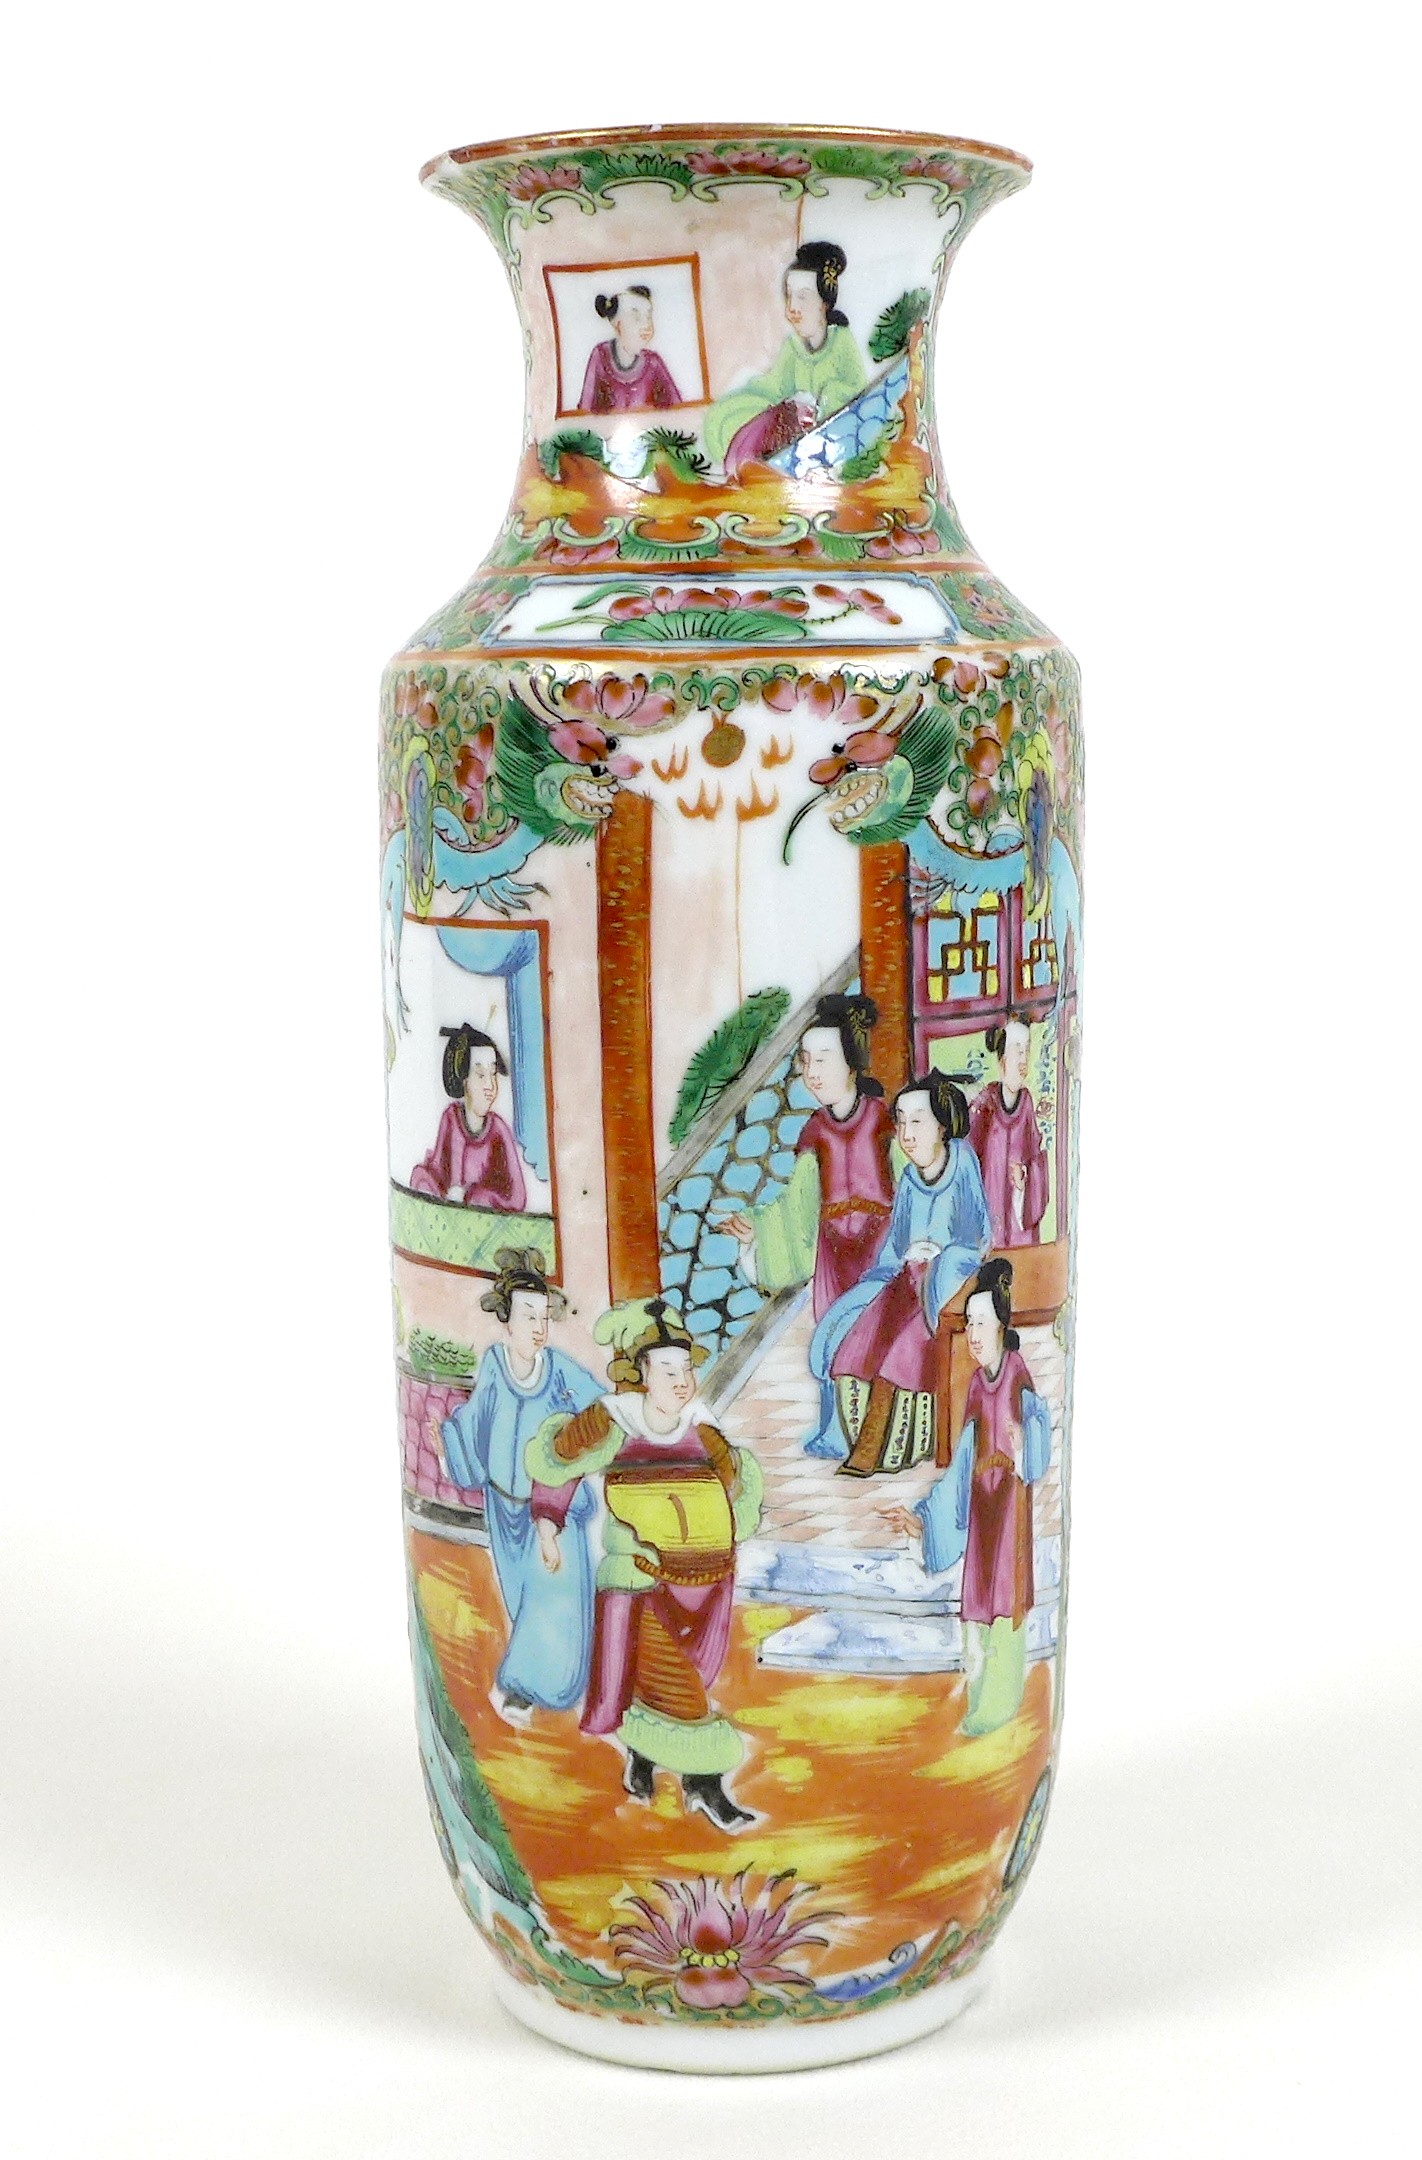 A Canton porcelain vase, Qing Dynasty, late 19th century, typically decorated with reserves of - Image 5 of 14